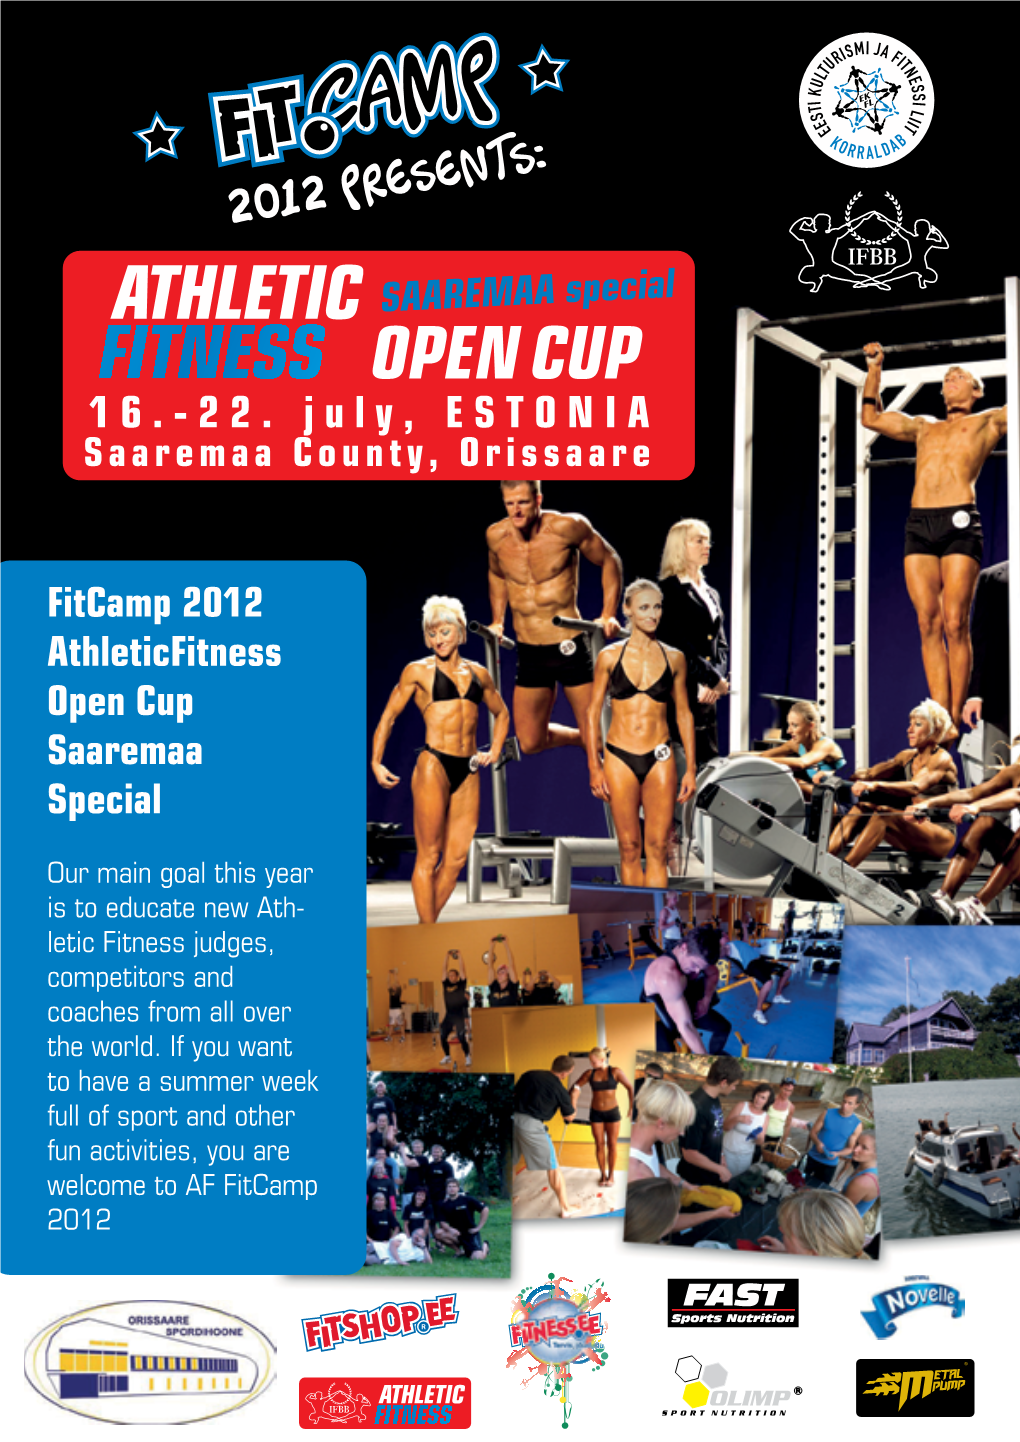 INTERNATIONAL ATHLETIC FITNESS FITCAMP When July 16-22, 2012